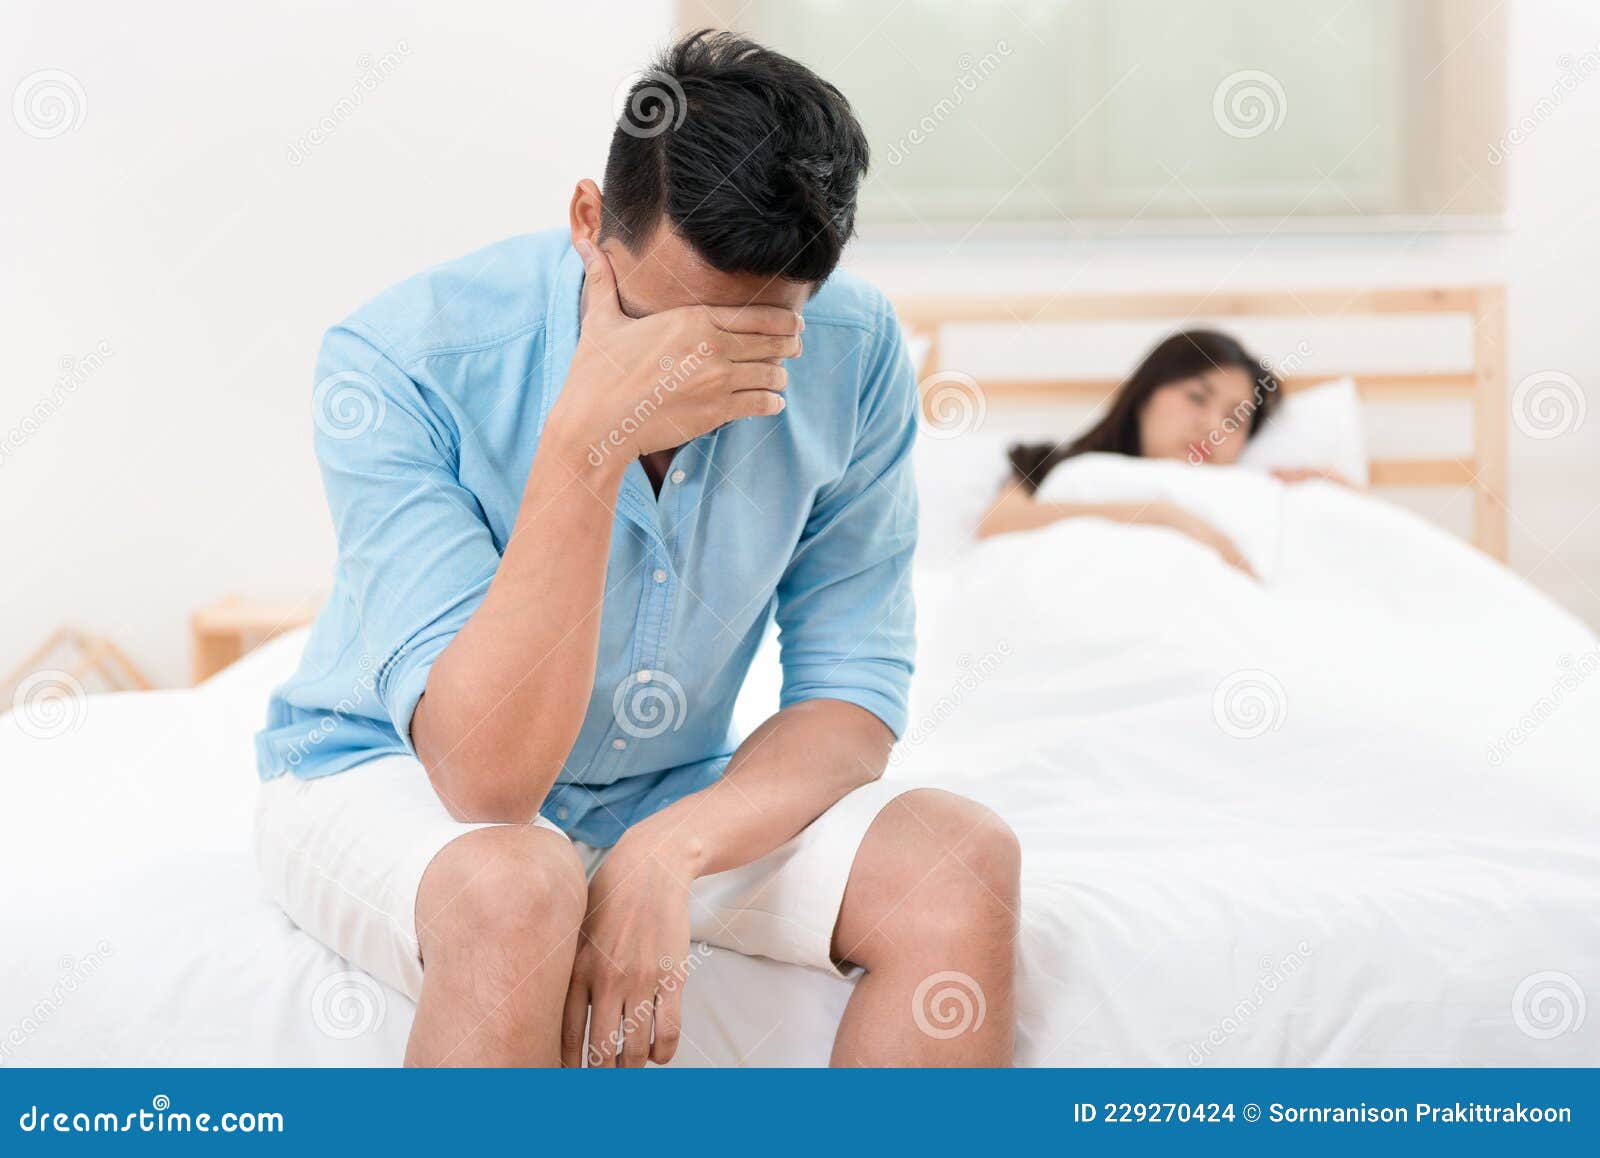 Husband Unhappy and Disappointed Stock Photo pic